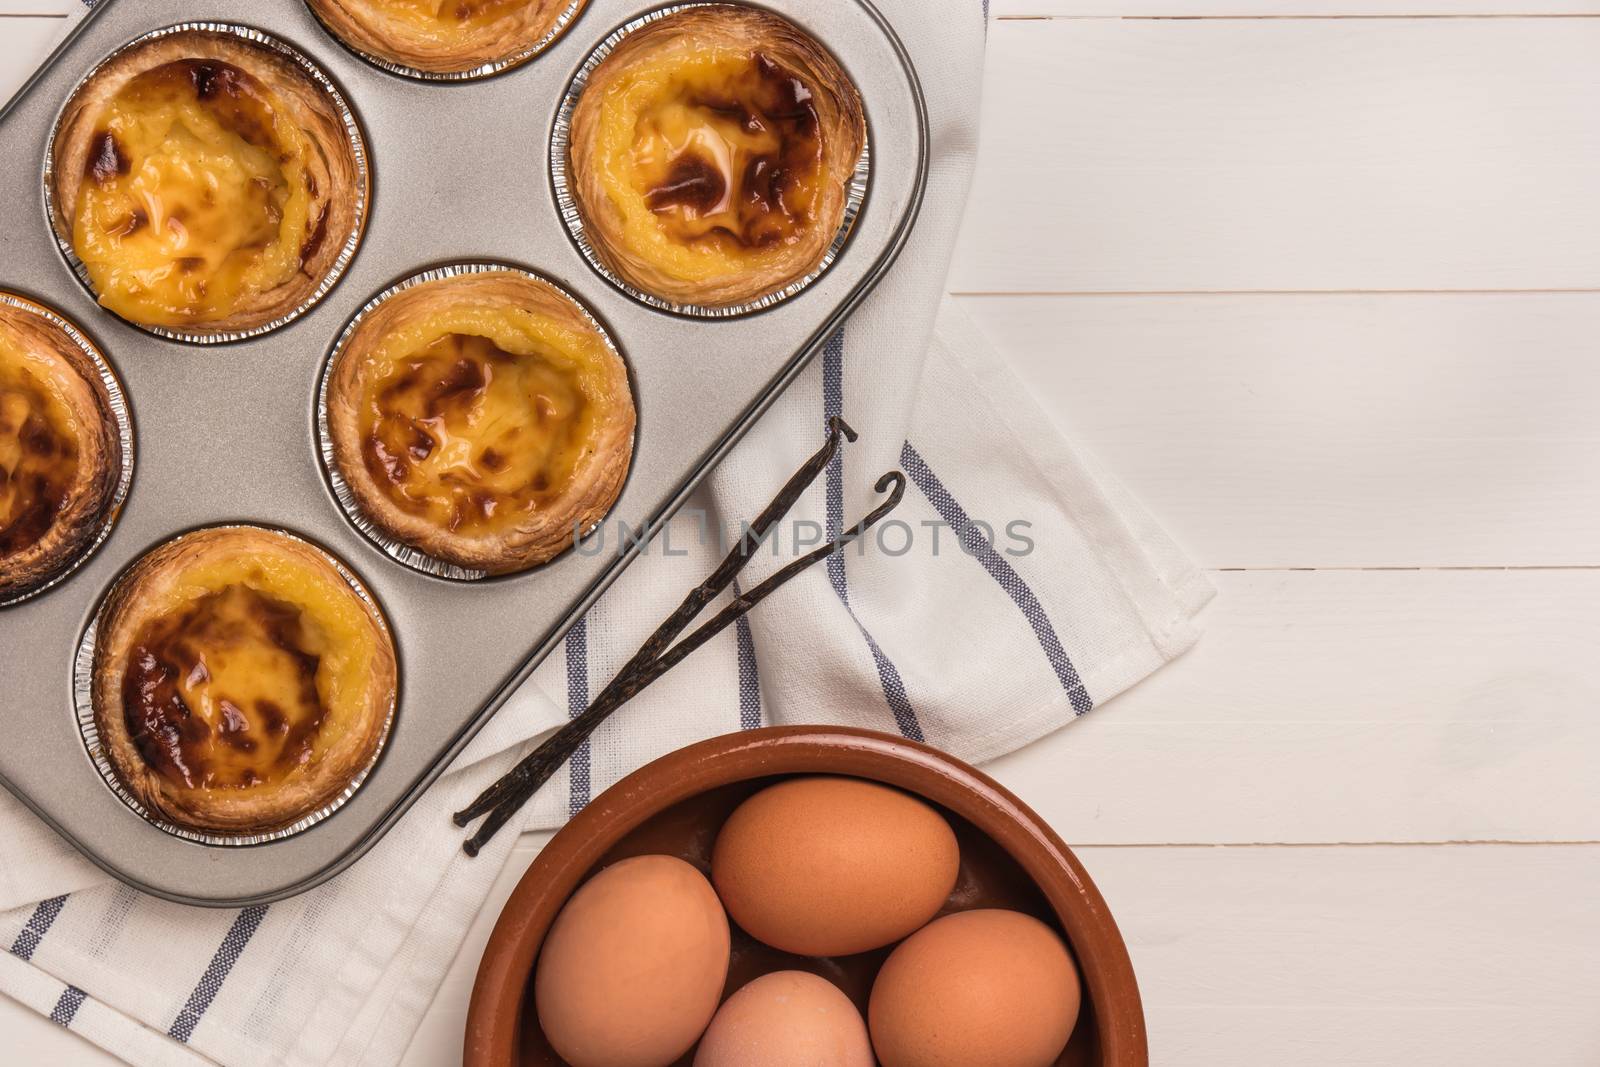 Pasteis de nata, typical Portuguese egg tart pastries from Lisbon on a set table. Top view with copy space